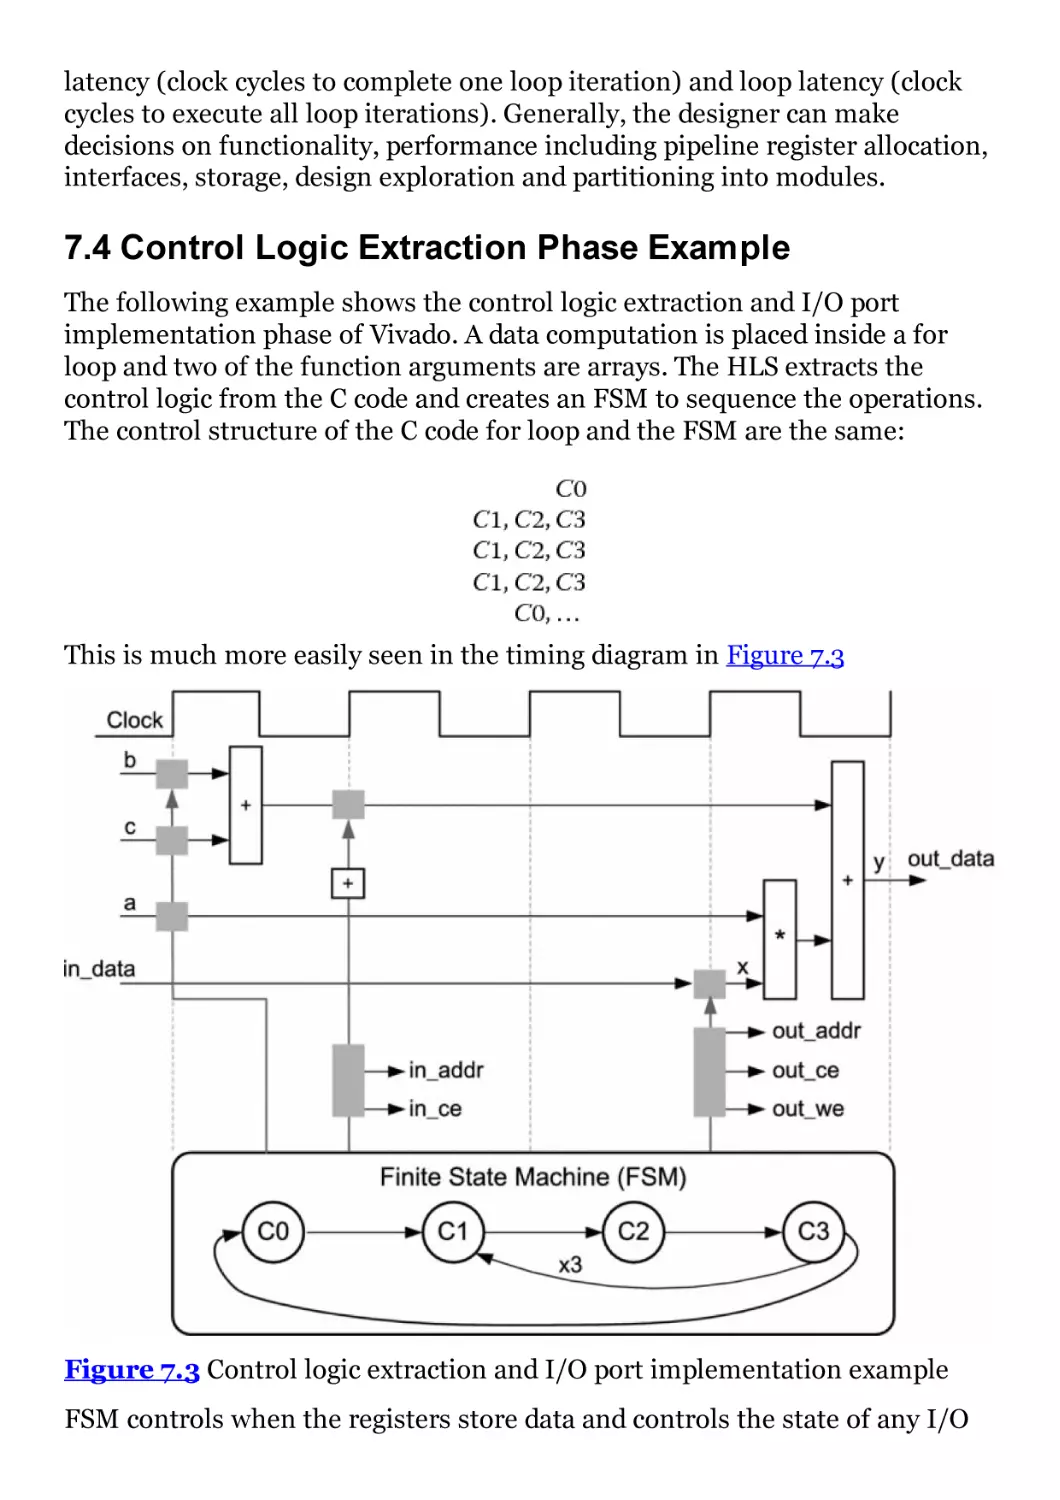 7.4 Control Logic Extraction Phase Example